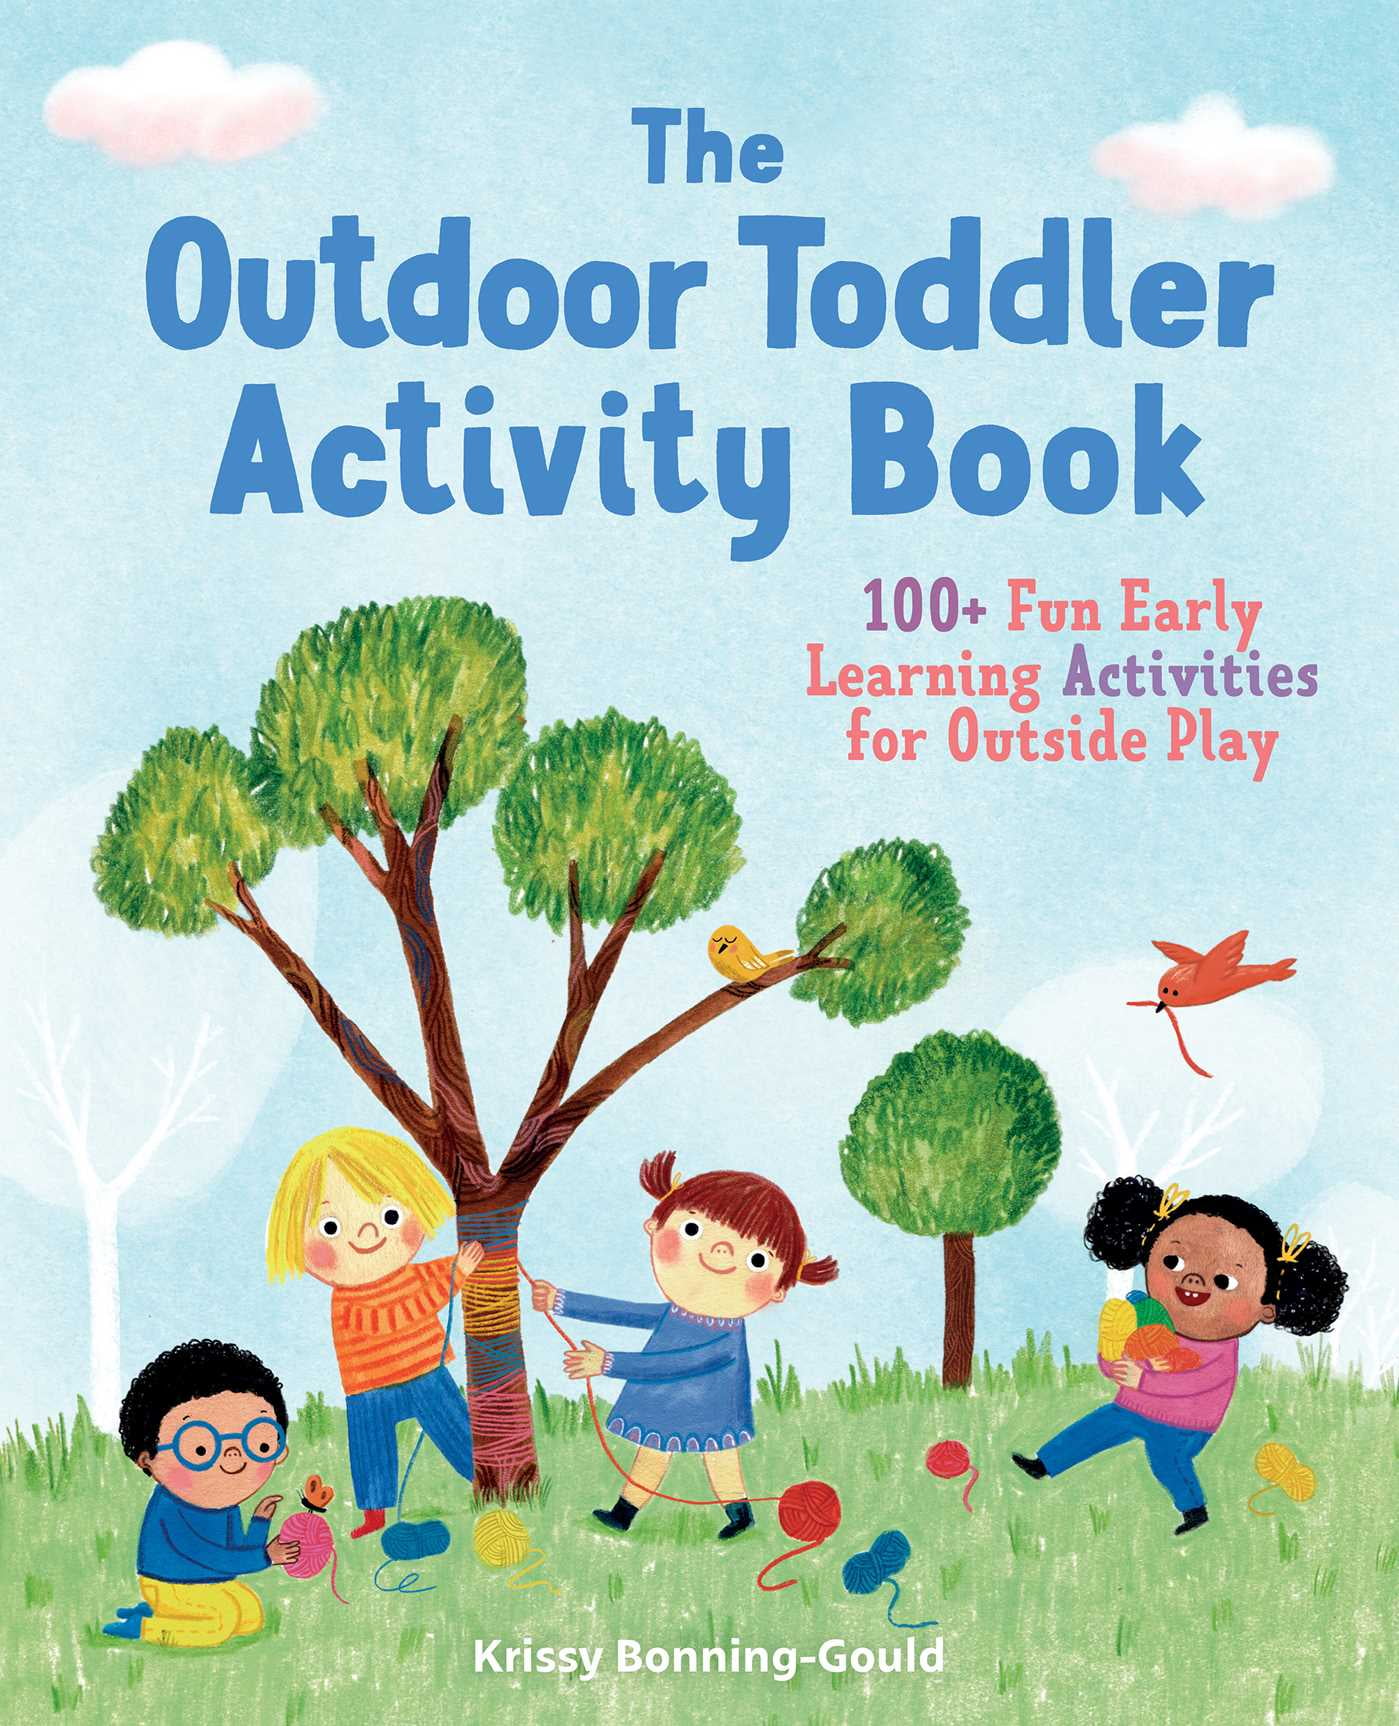 The Outdoor Toddler Activity Book: 100+ Fun Early Learning Activities for Outside Play [Book]